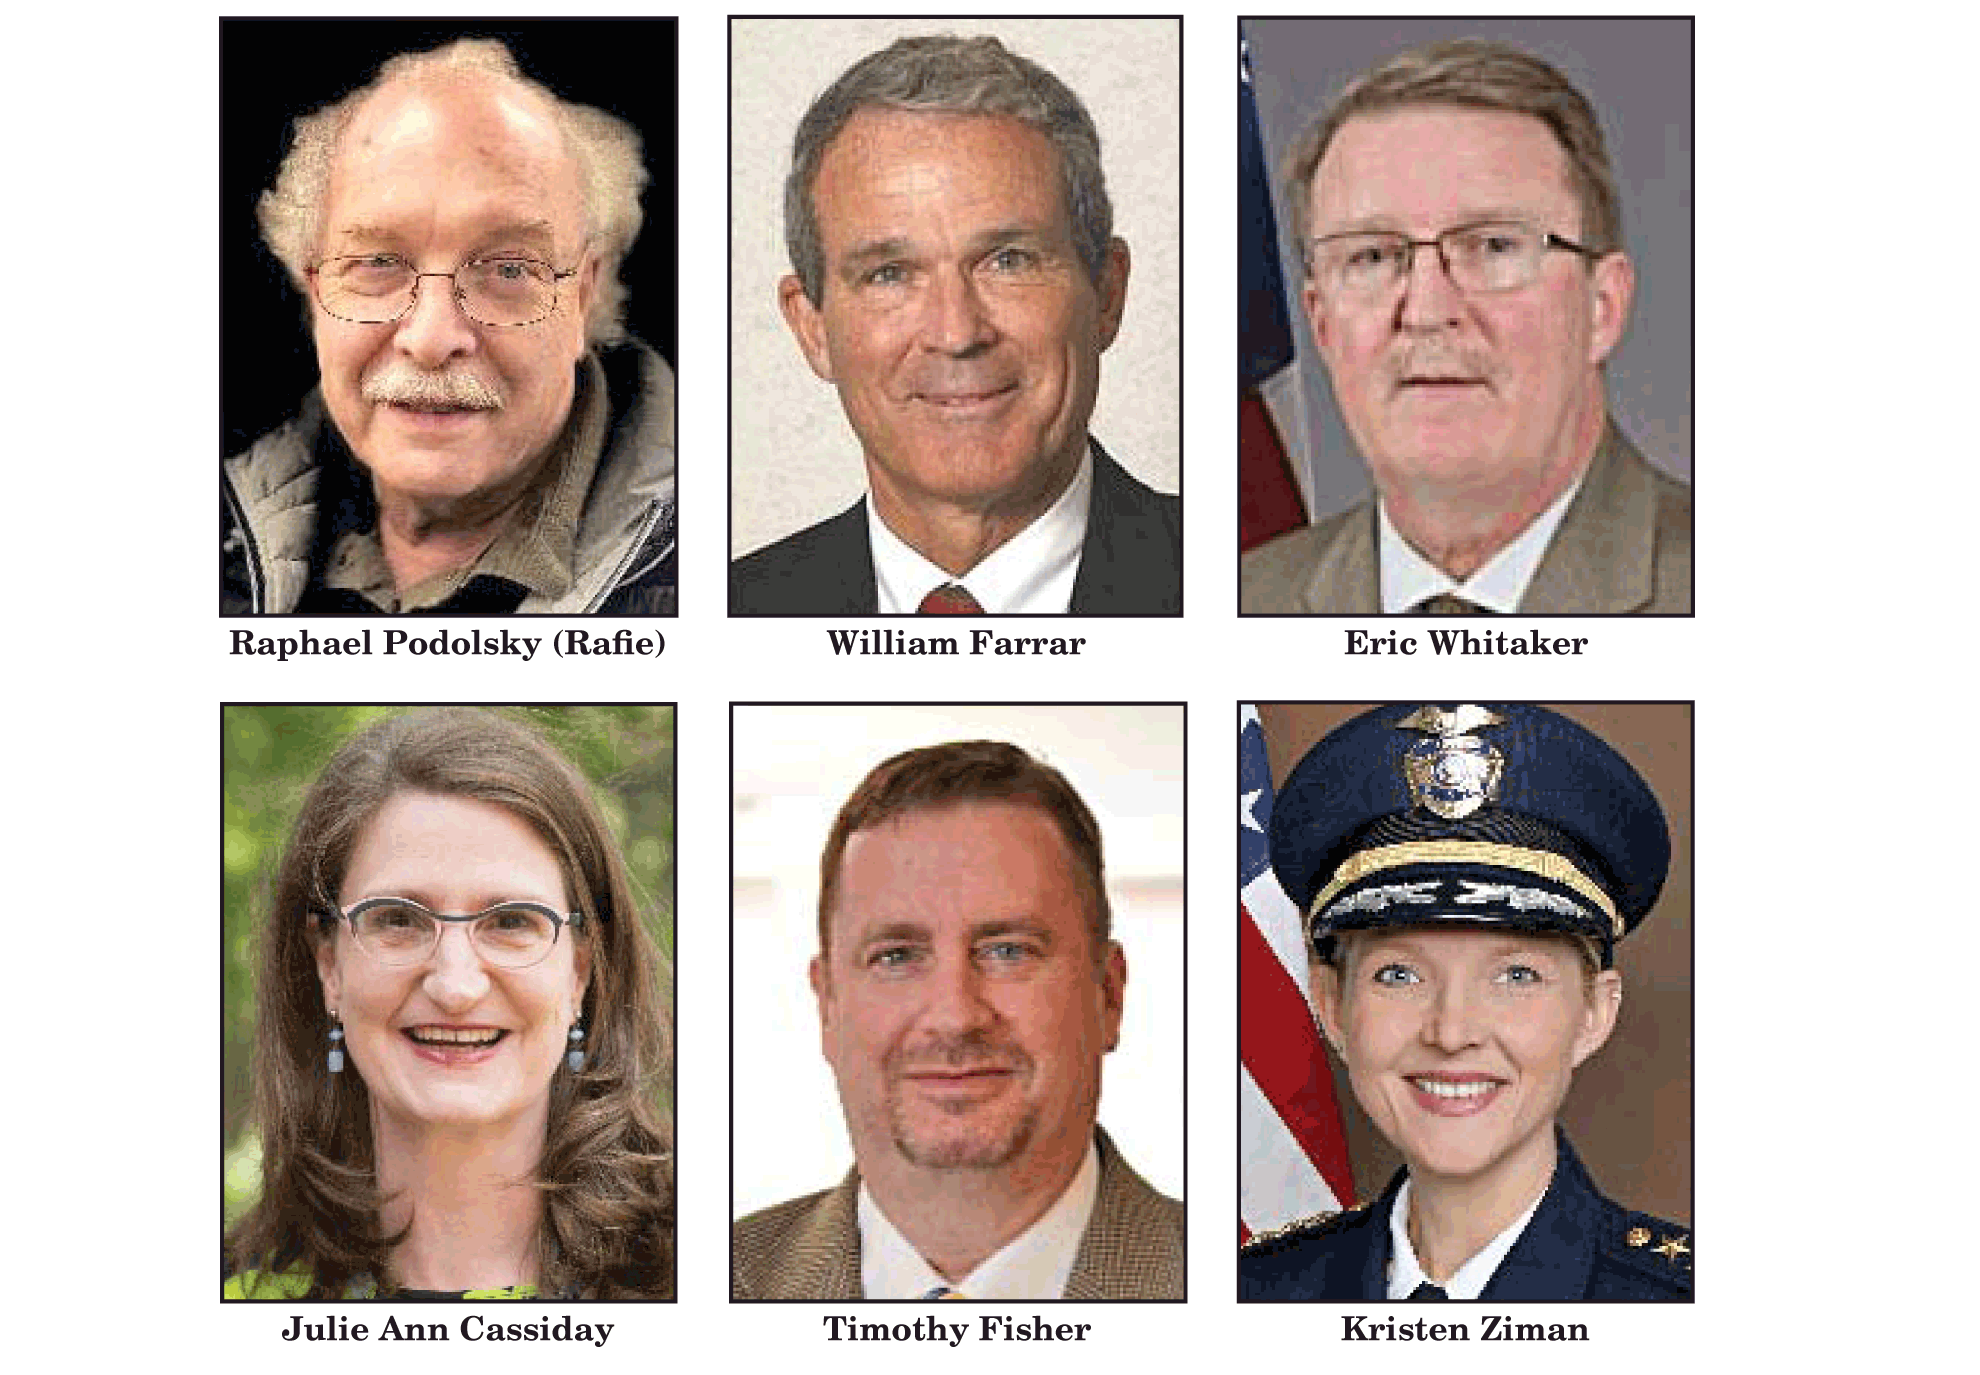 The A+ Foundation for West Aurora Schools will celebrate the 13th anniversary of the Distinguished Alumni Hall of Honor April 26 and 27. This year, six individuals will be inducted into the Hall of Honor: Raphael Podolsky, William Farrar, Eric Whitaker, Julie Ann Cassiday, Timothy Fisher, and Kristen Ziman.